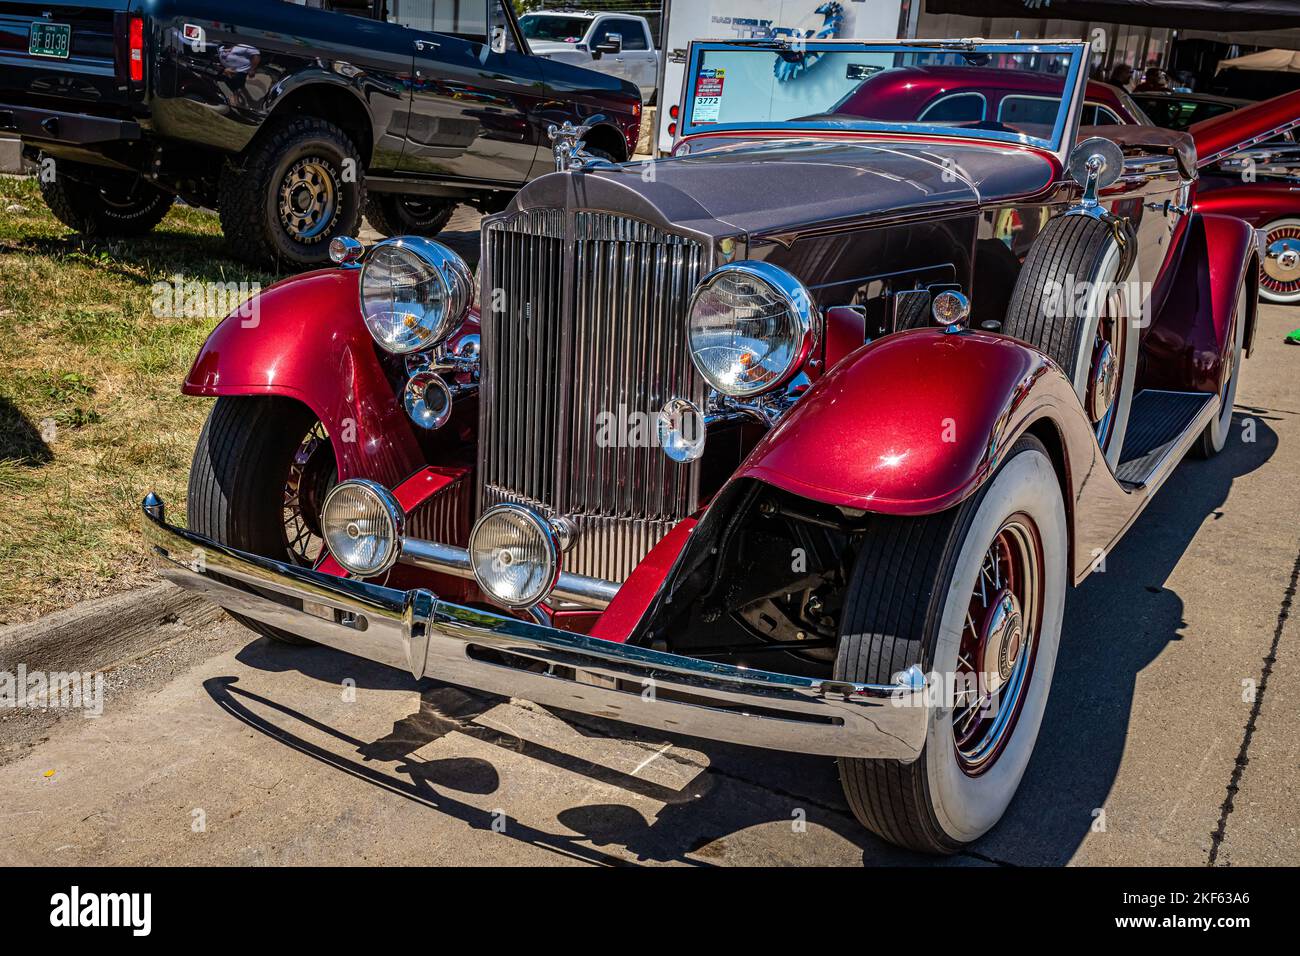 Des Moines, IA - July 02, 2022: High perspective front view of a 1933 Packard Super Eight Coupe Roadster at a local car show. Stock Photo